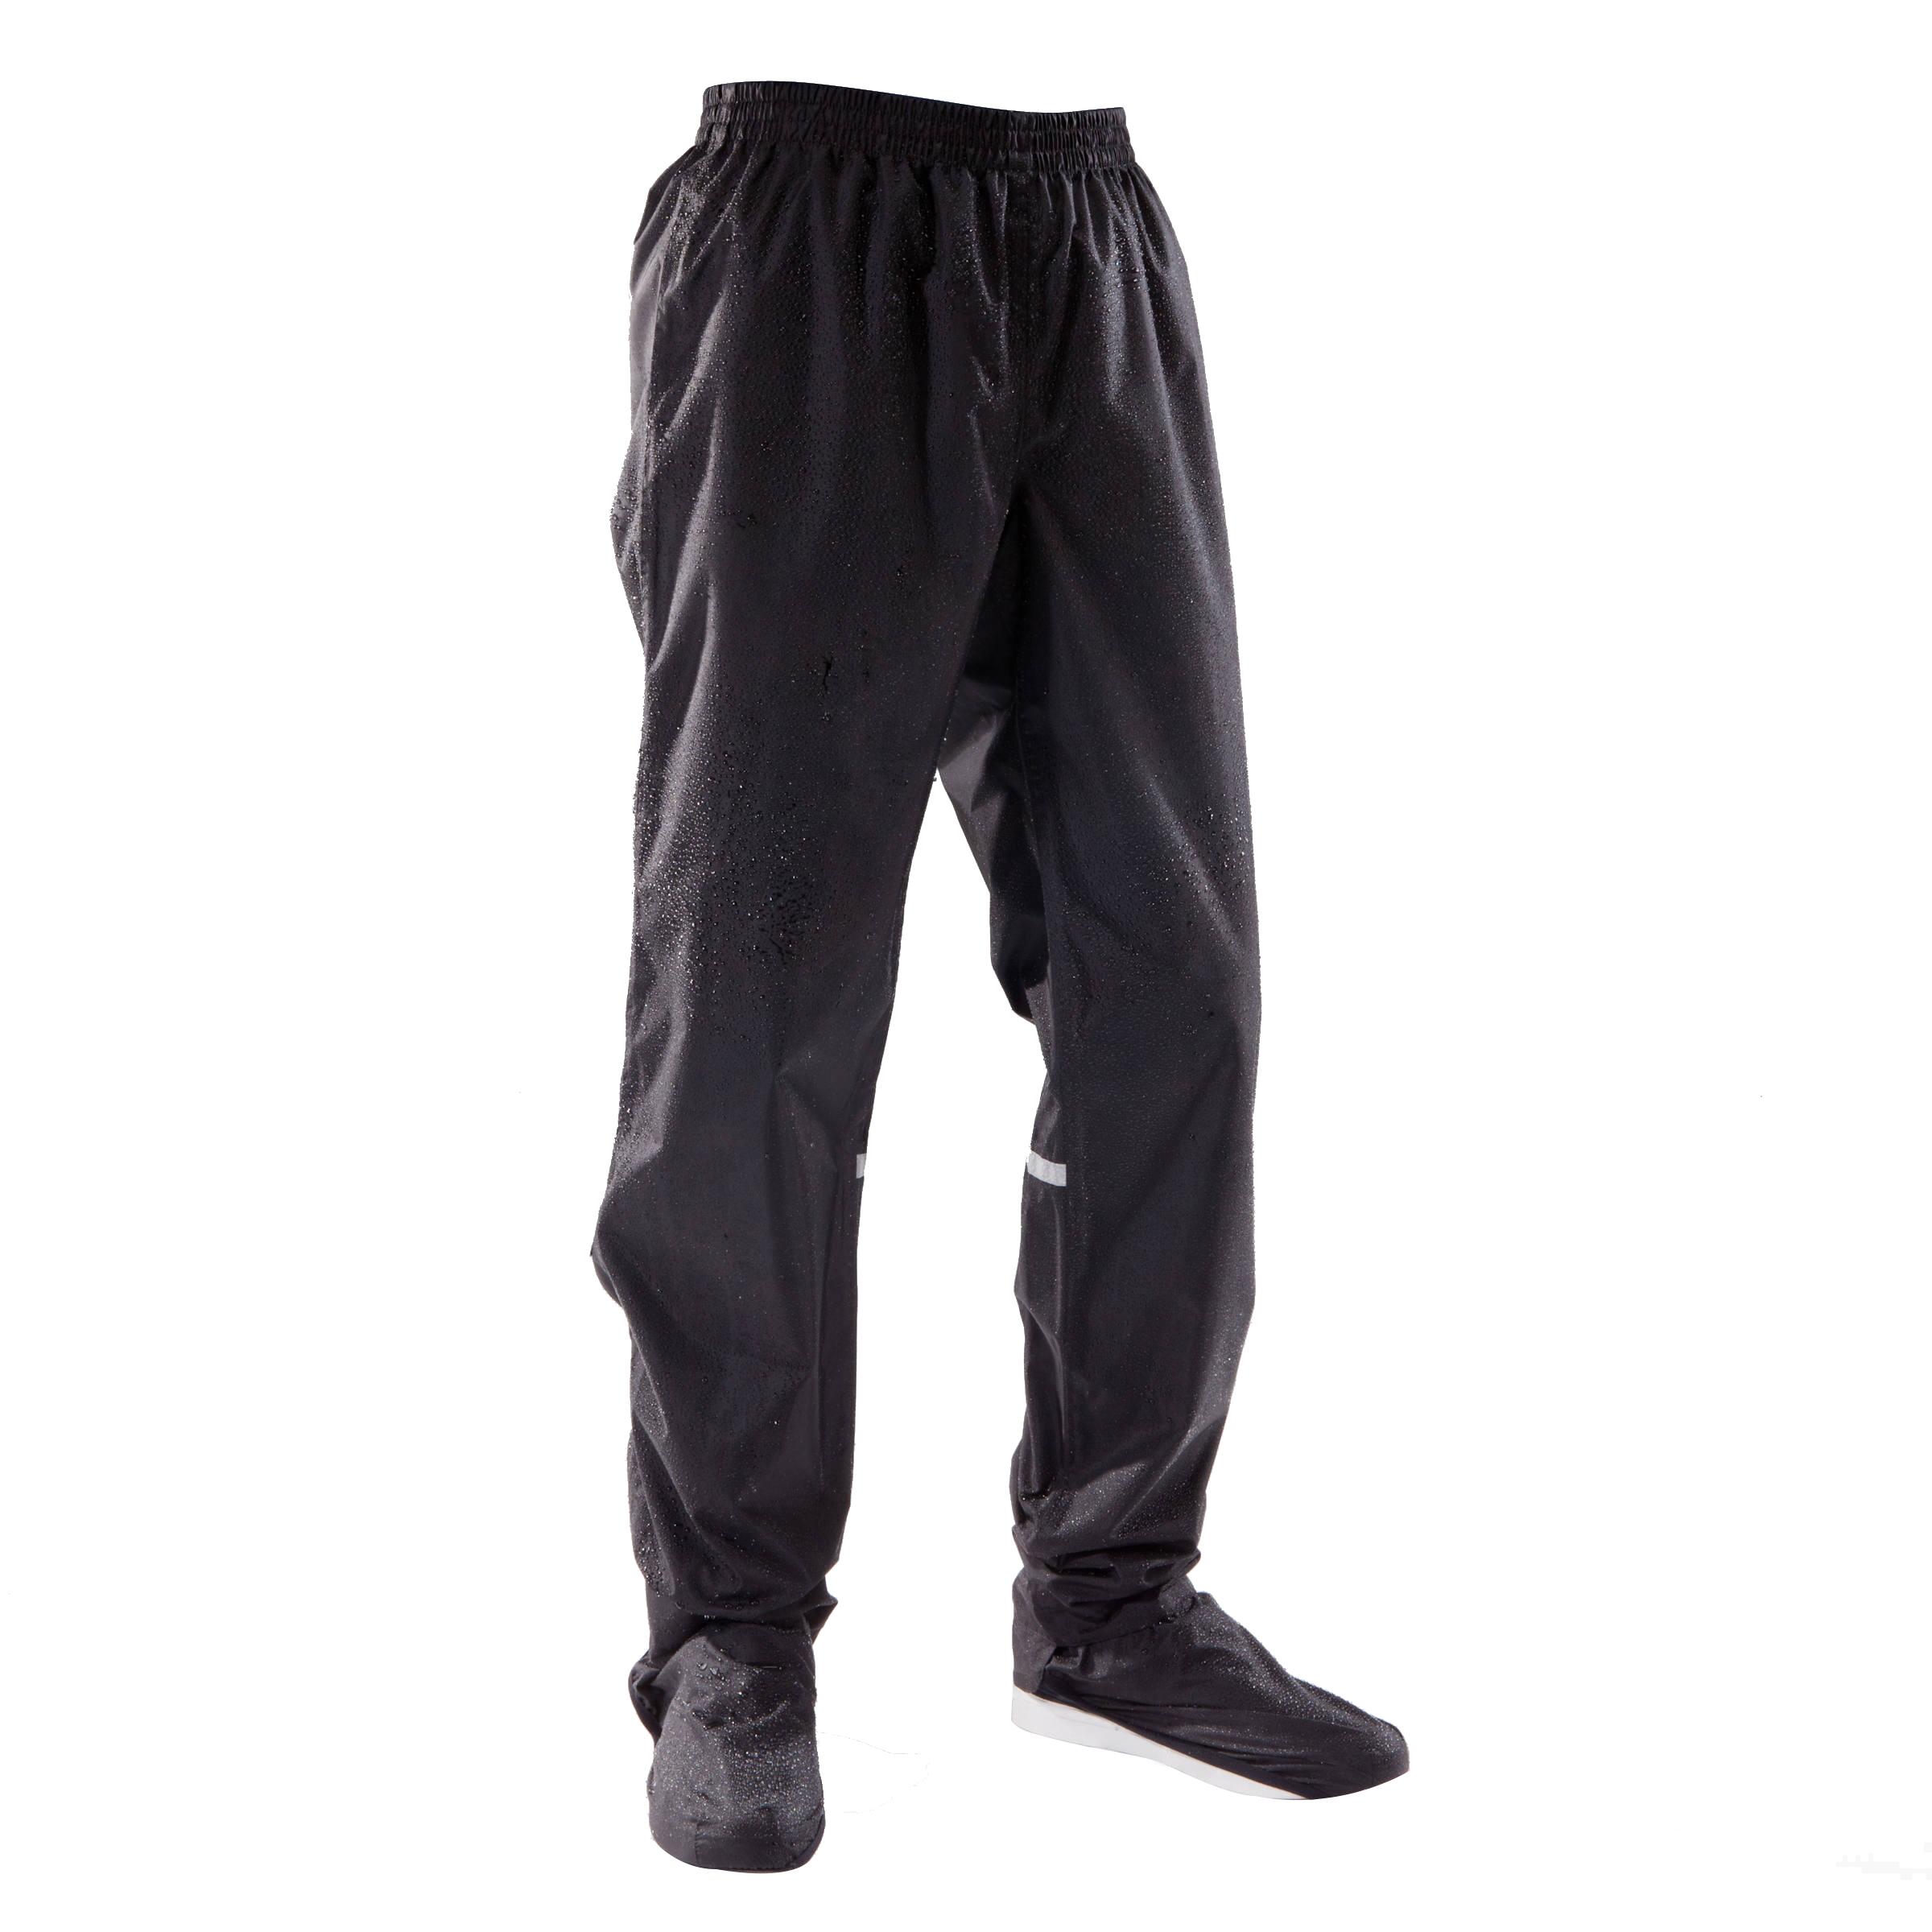 BTWin 100 City Cycling Rain Overtrousers Review | Cycling Weekly